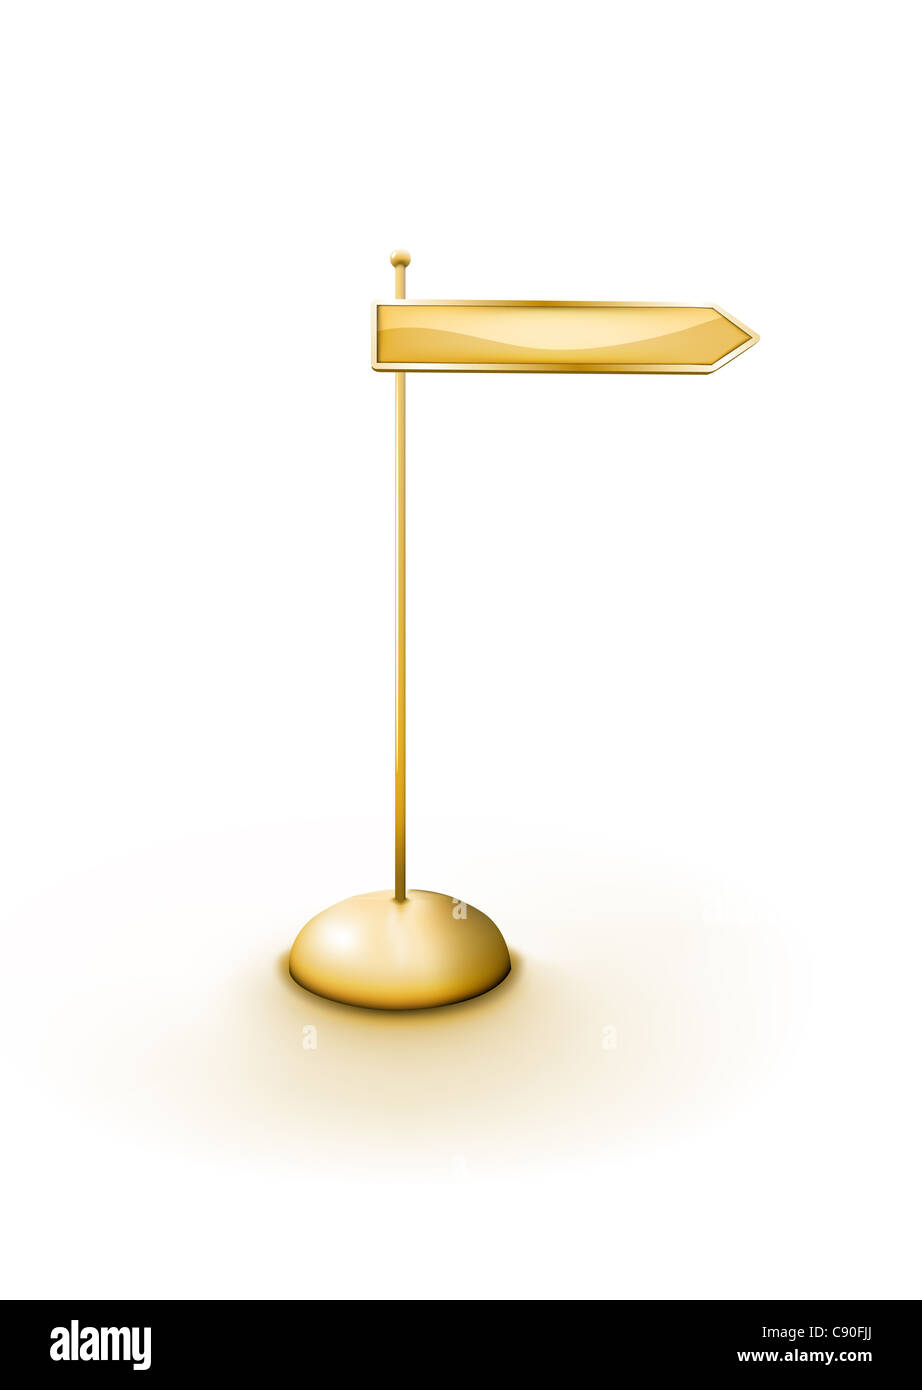 illustration of golden arrowed direction sign. You can easily change color, put in your own signage text. Stock Photo